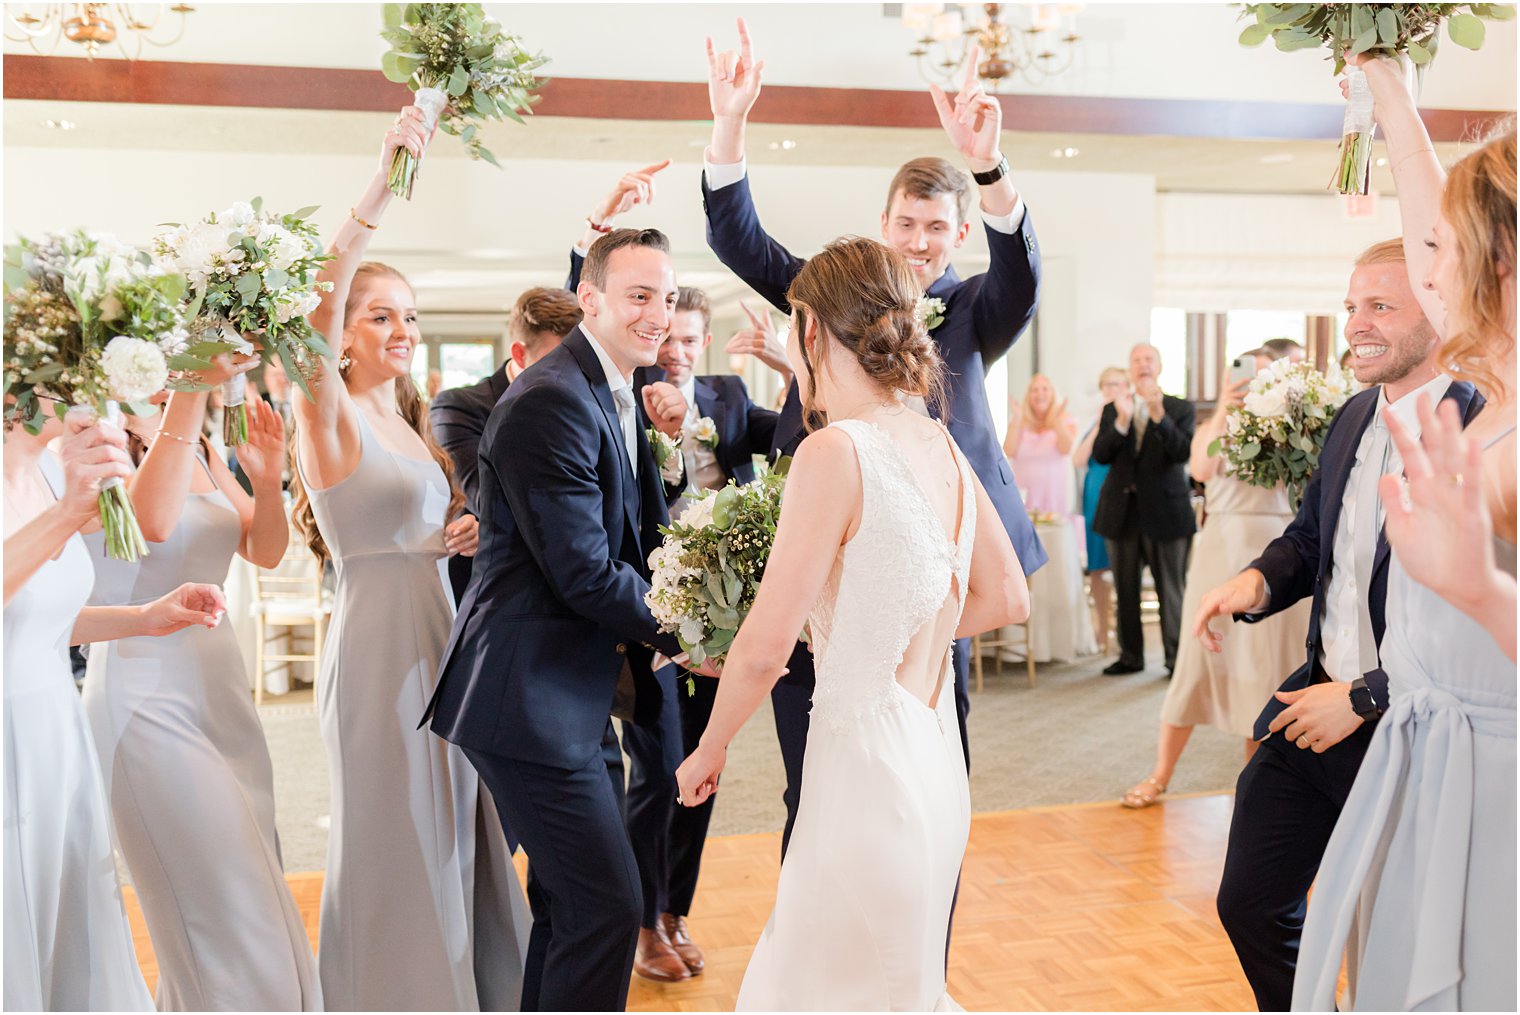 newlyweds dance with guests during Morristown NJ wedding reception